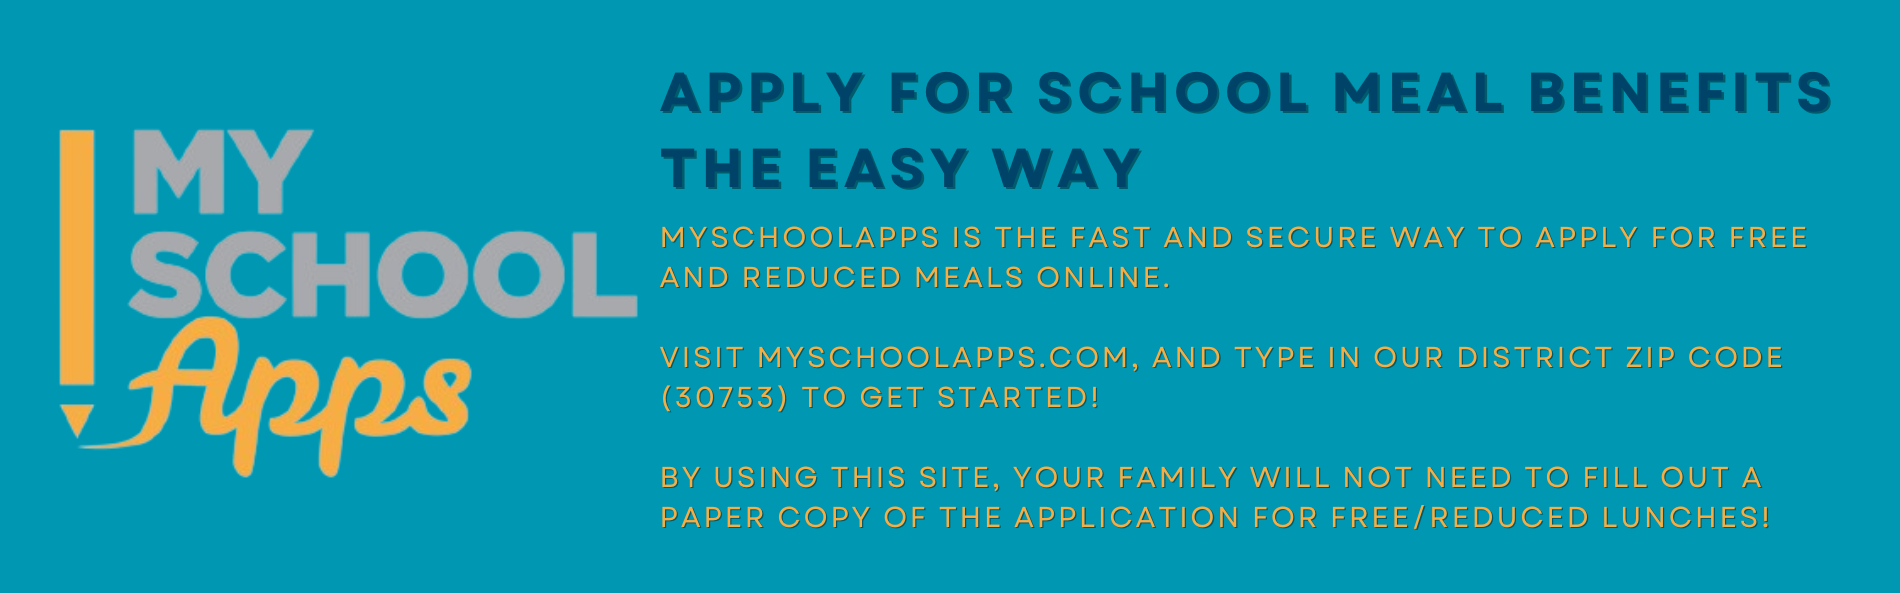 Visit www.myschoolapps.com to fill out an online copy of the free/reduced lunch application!